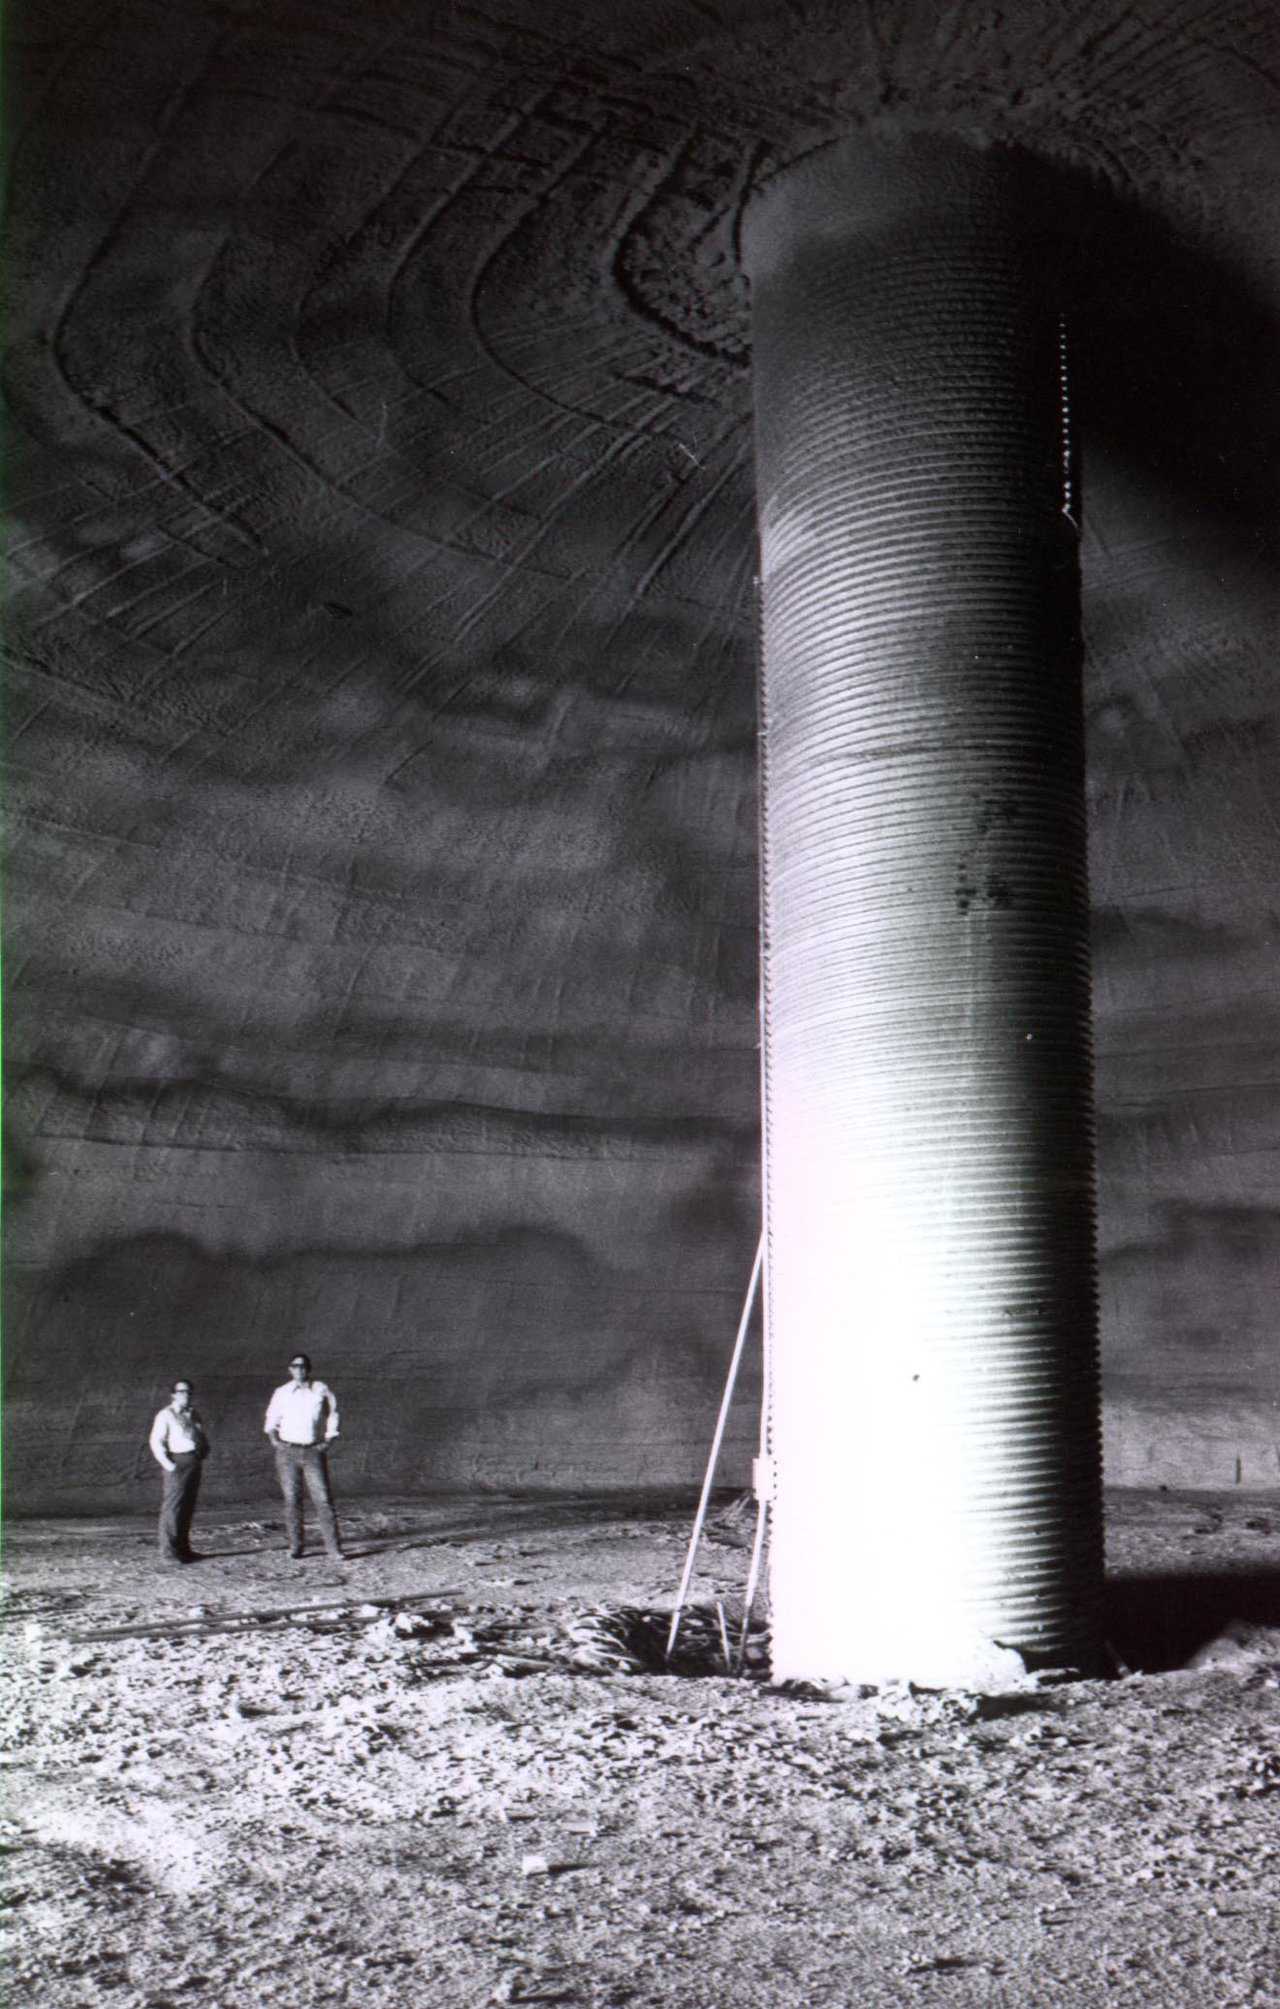 David B. South and the proud owner of the first Monolithic Dome potato storage built in Shelley, Idaho in 1975 survey the dome’s interior. That interior was soon filled with potatoes stacked into piles, often 20 feet high.